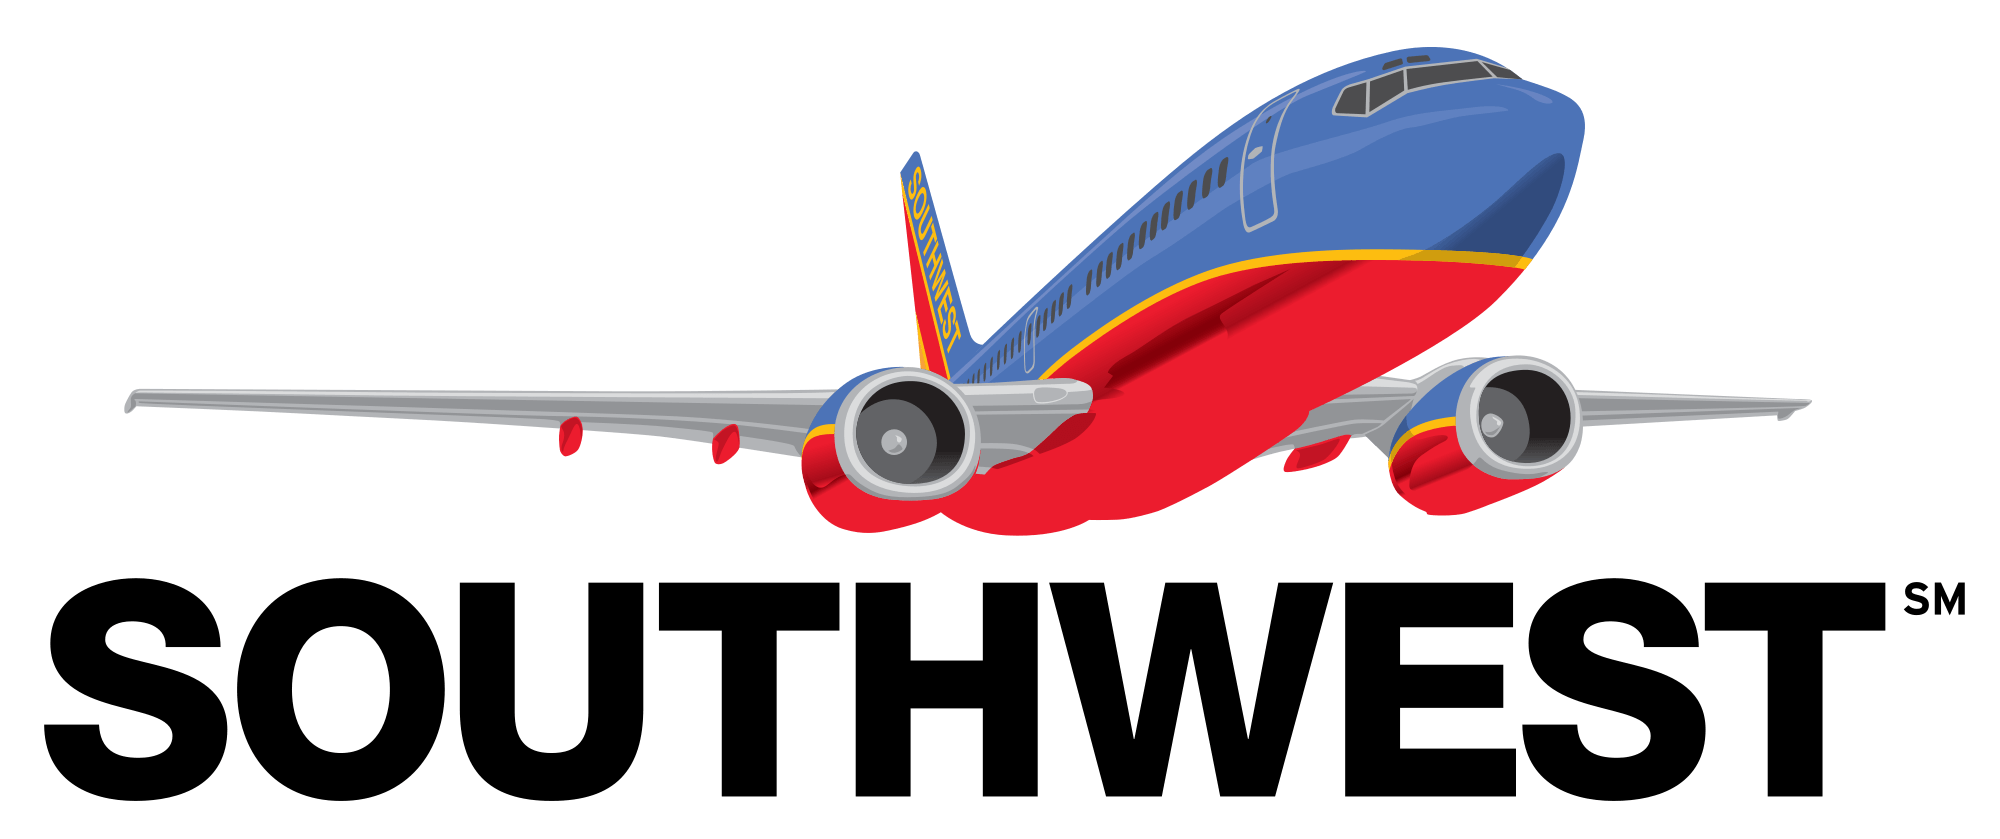 South West Airlines Logo - Southwest-Airlines-Logo